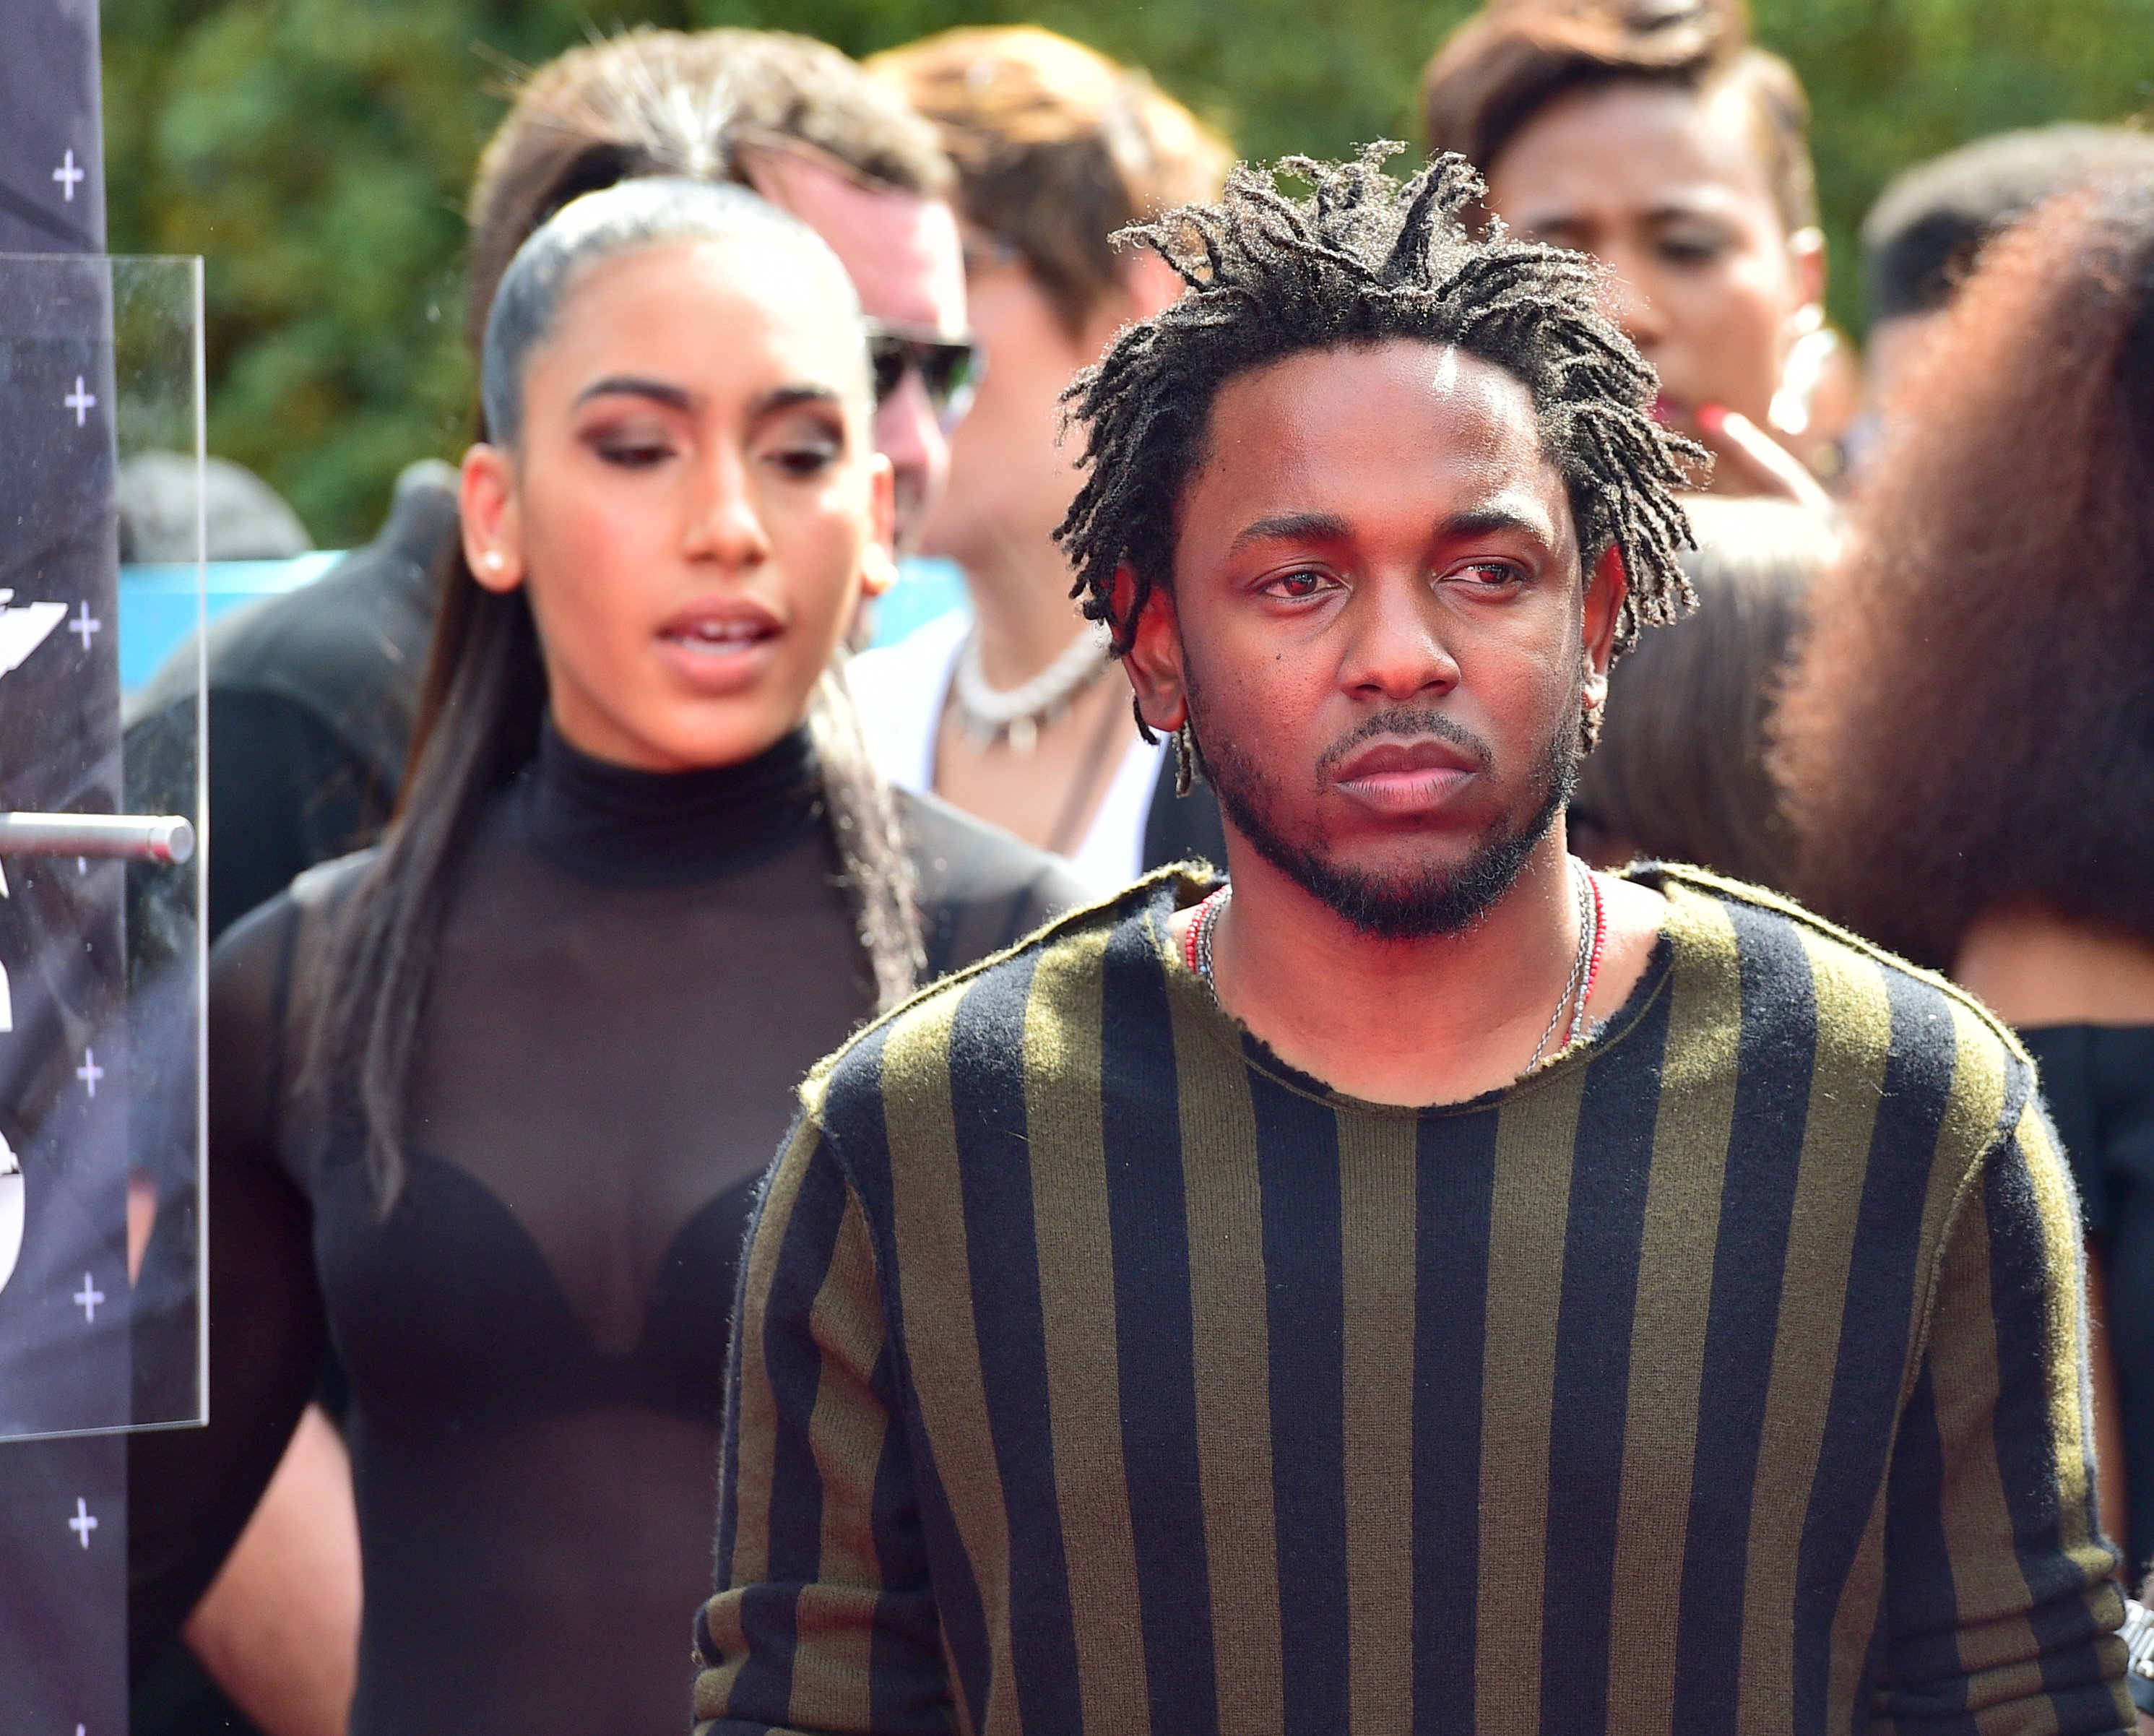 Whitney Alford and Kendrick Lamar at the 2015 BET Awards on June 28, 2015 in Los Angeles, California. | Source: Getty Images